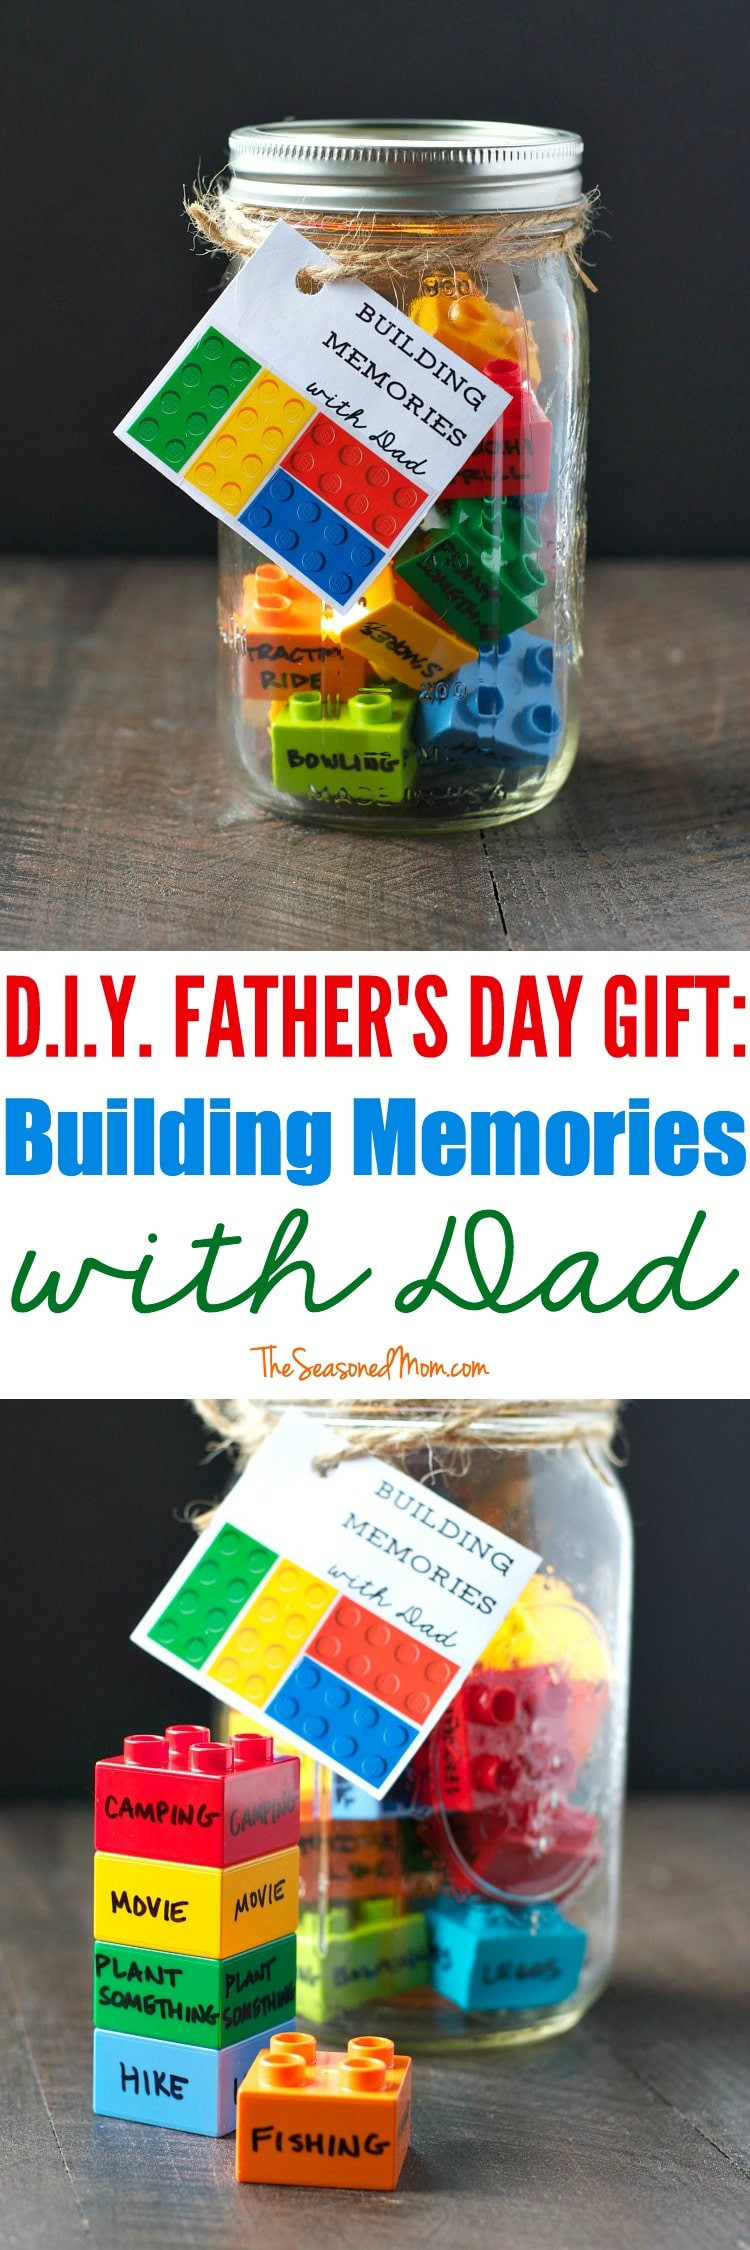 Gifts From Kids
 25 Homemade Father s Day Gifts from Kids That Dad Can